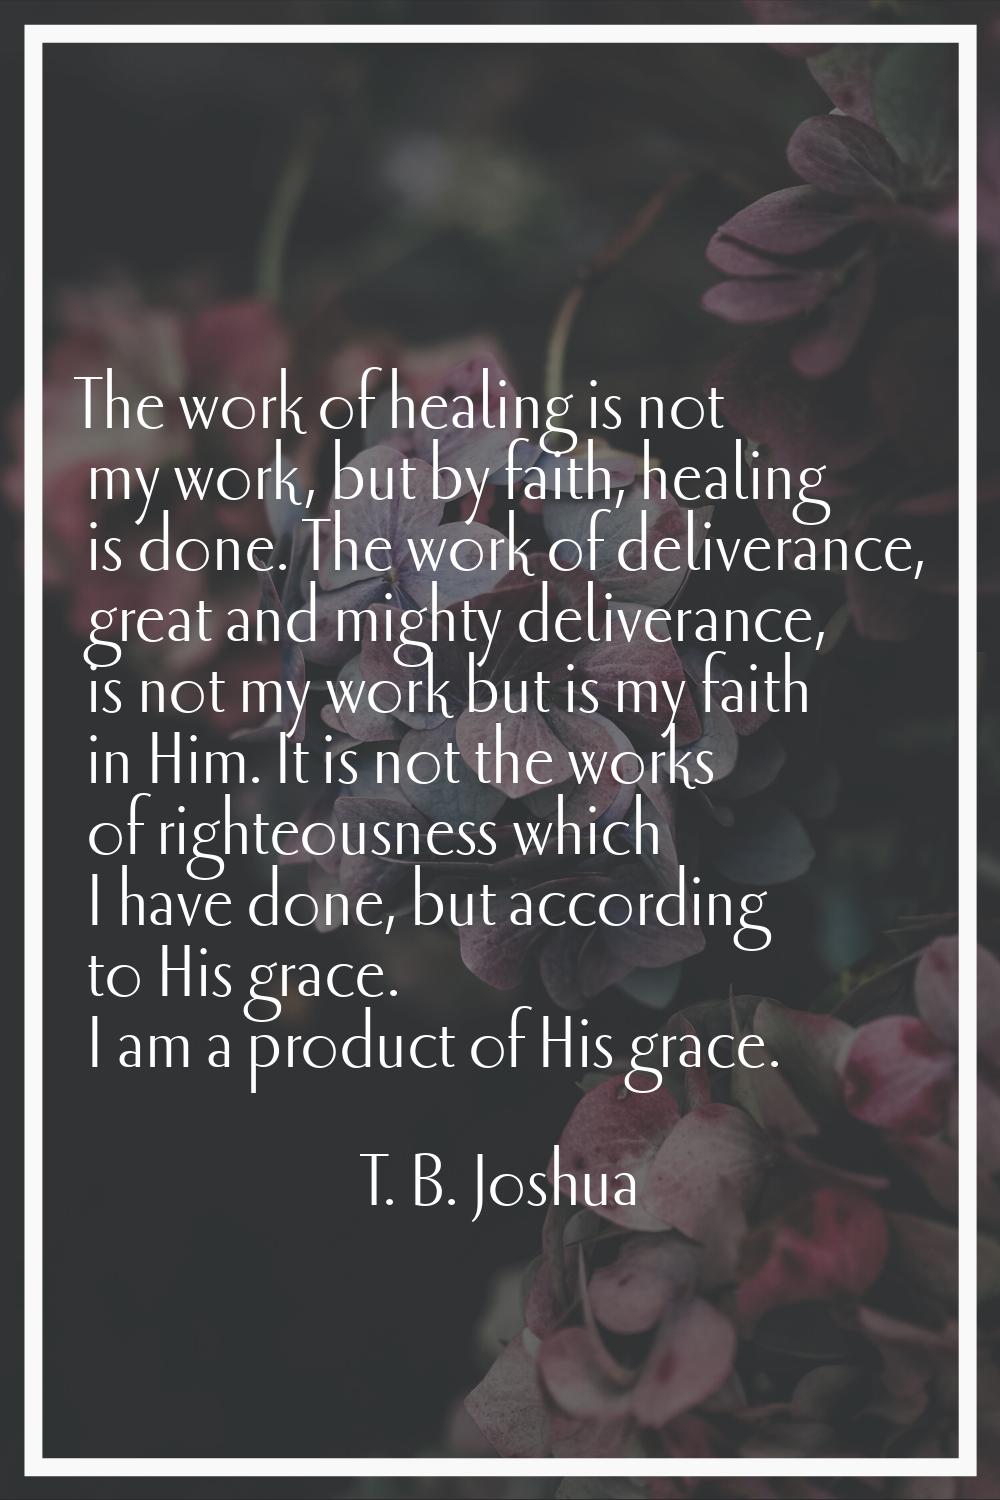 The work of healing is not my work, but by faith, healing is done. The work of deliverance, great a